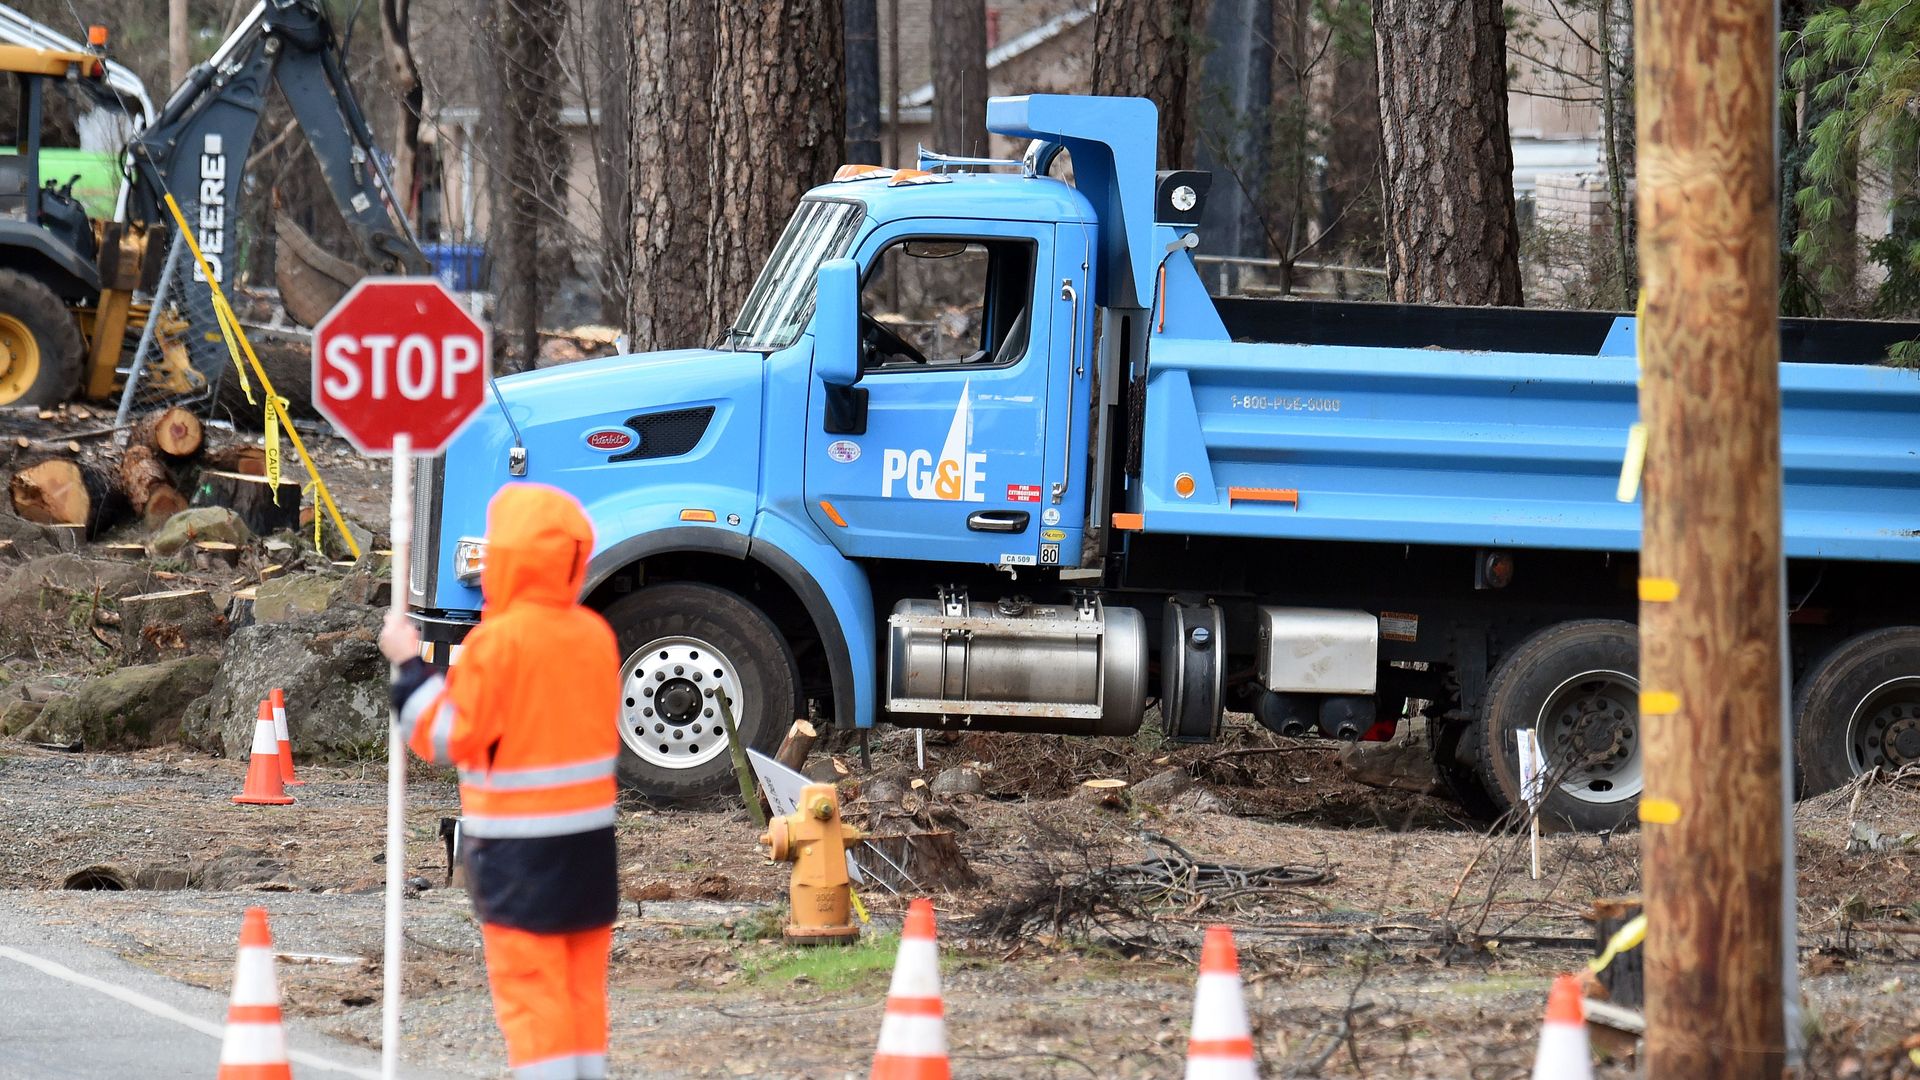 A construction worker holds a stop sign in front of a blue PG&E service vehicle in a burned area.